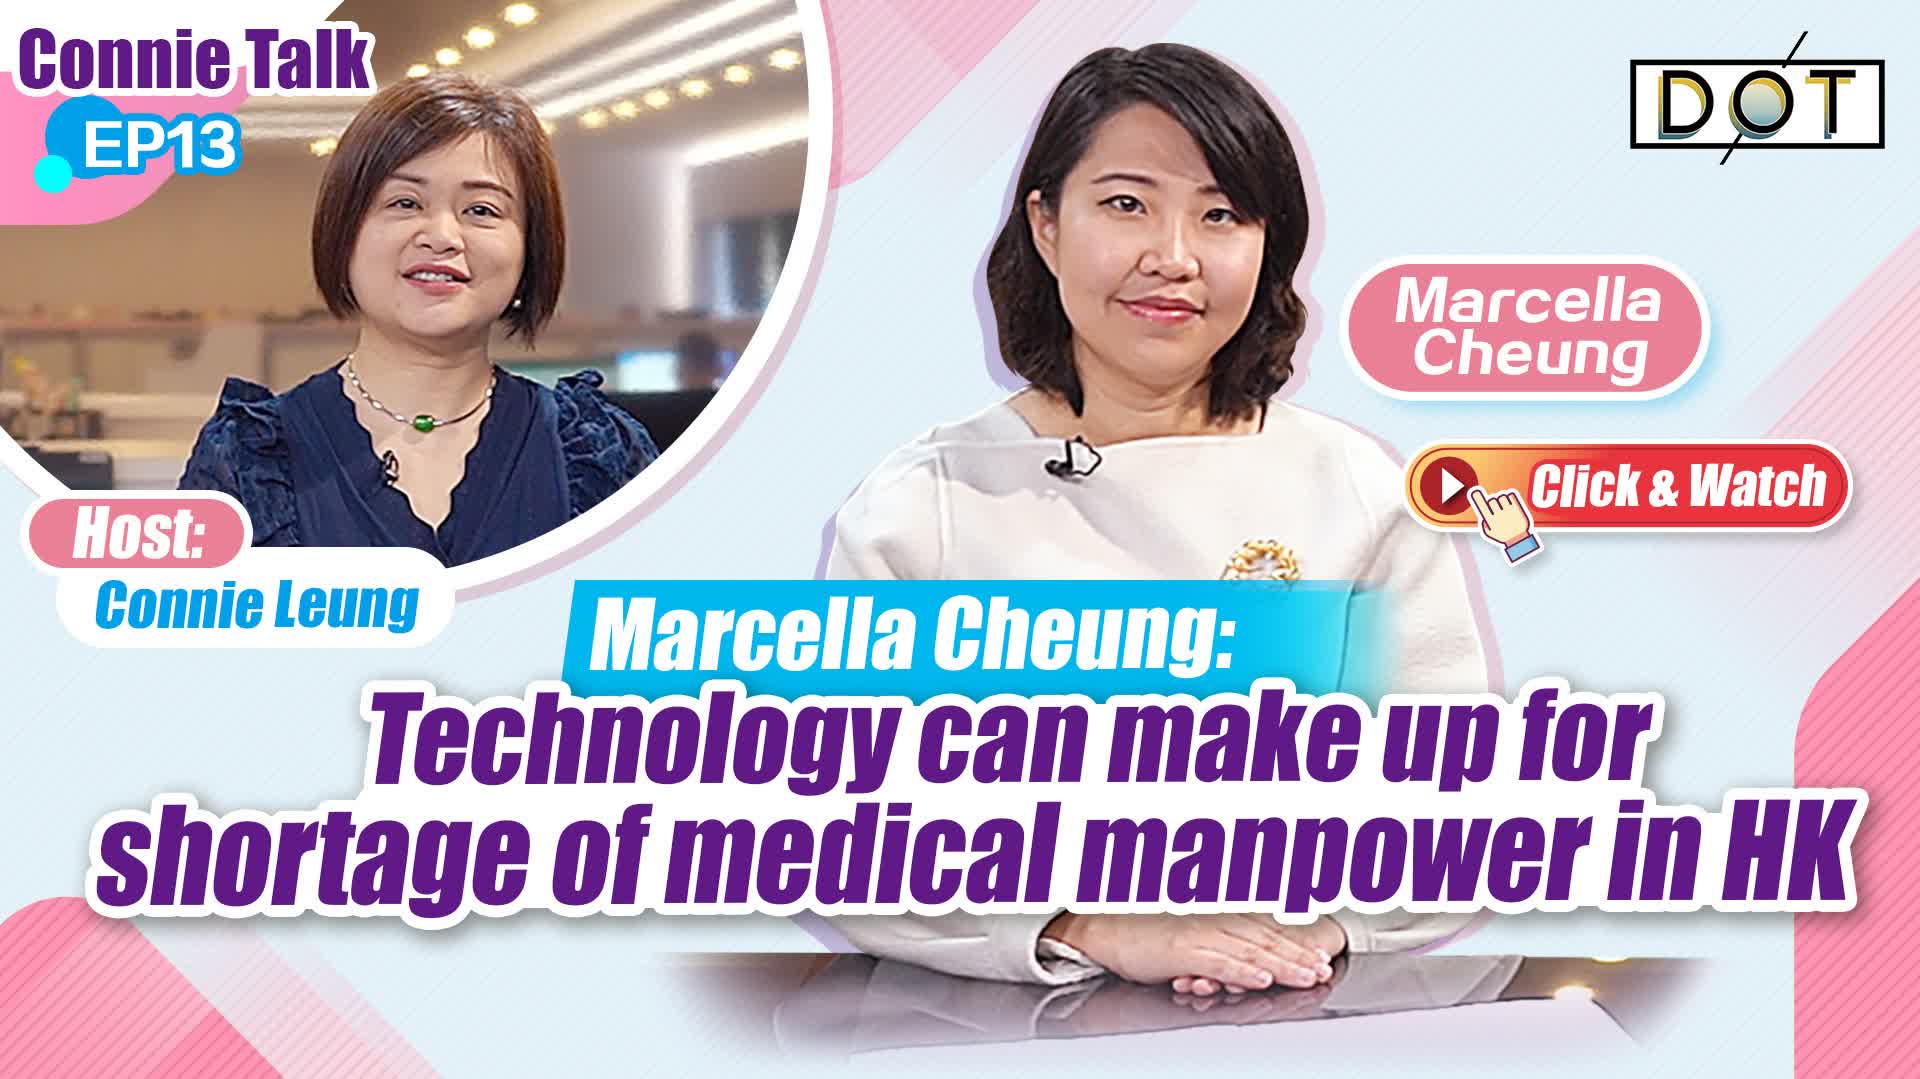 Connie Talk | Marcella Cheung: Technology can make up for shortage of medical manpower in HK